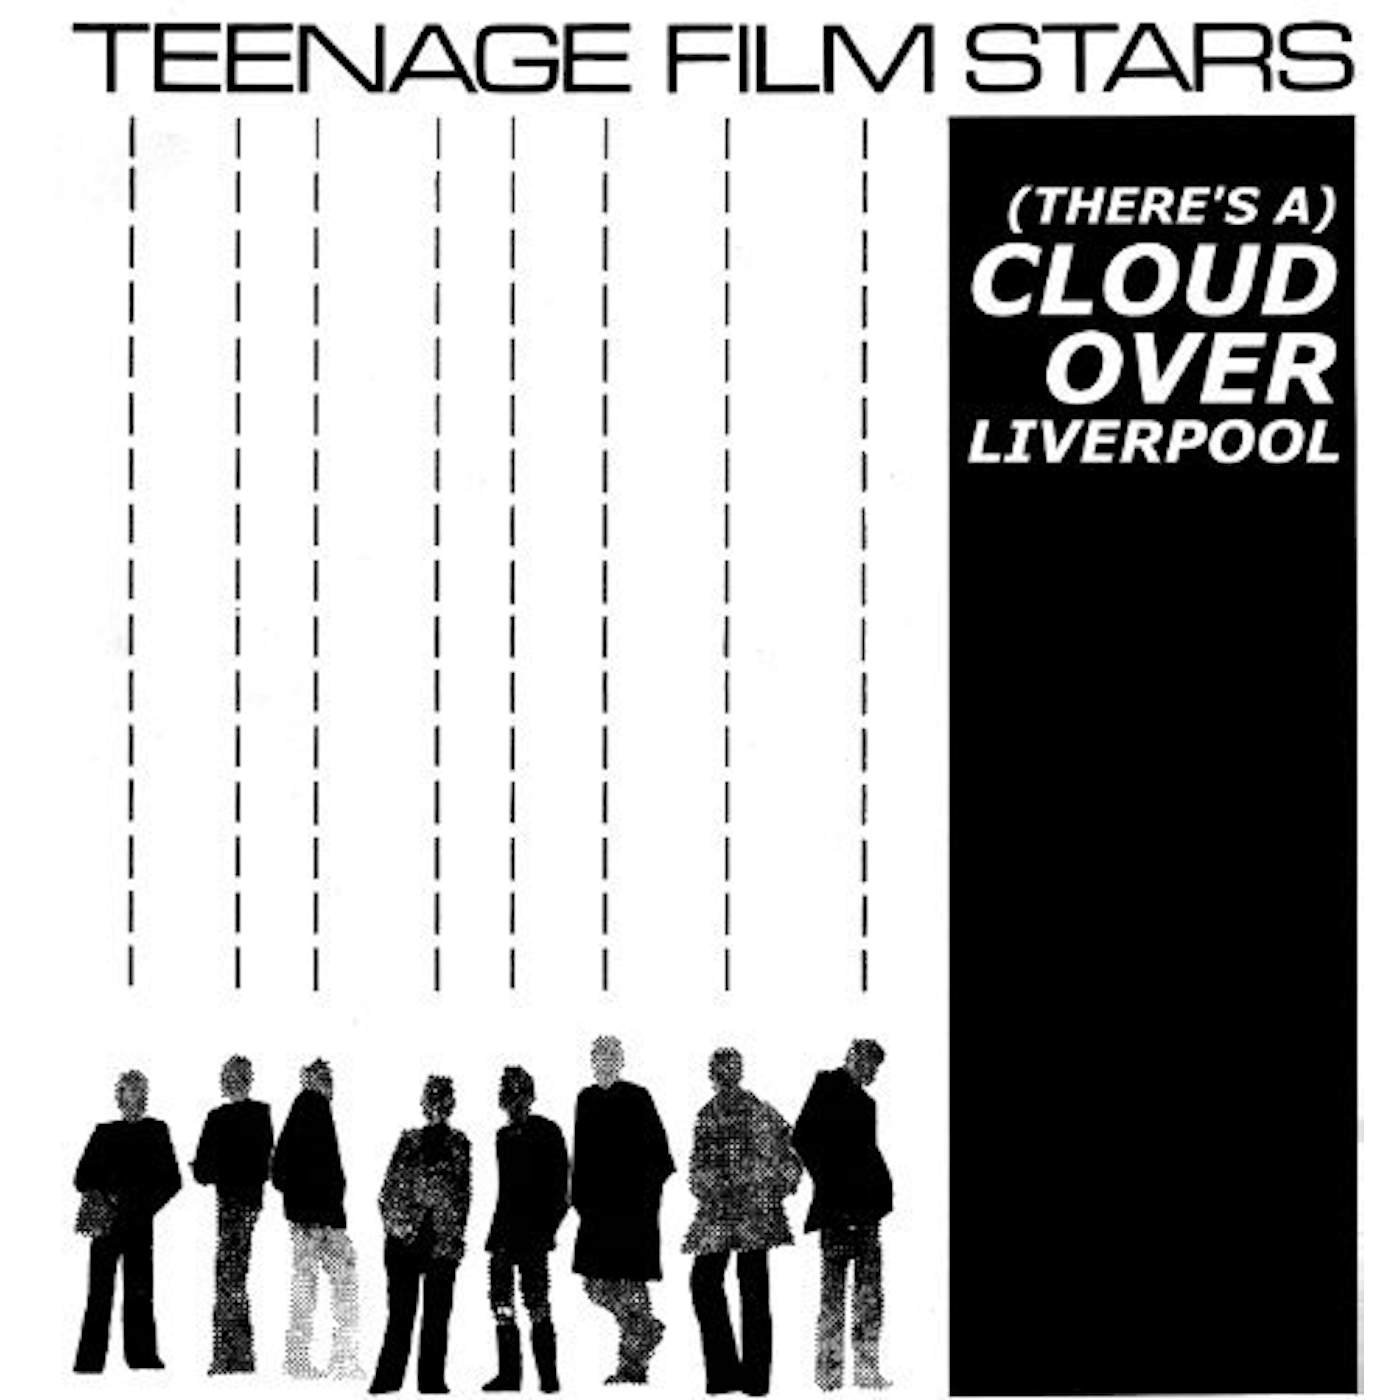 Teenage Filmstars (There's A) Cloud Over Liverpool Vinyl Record